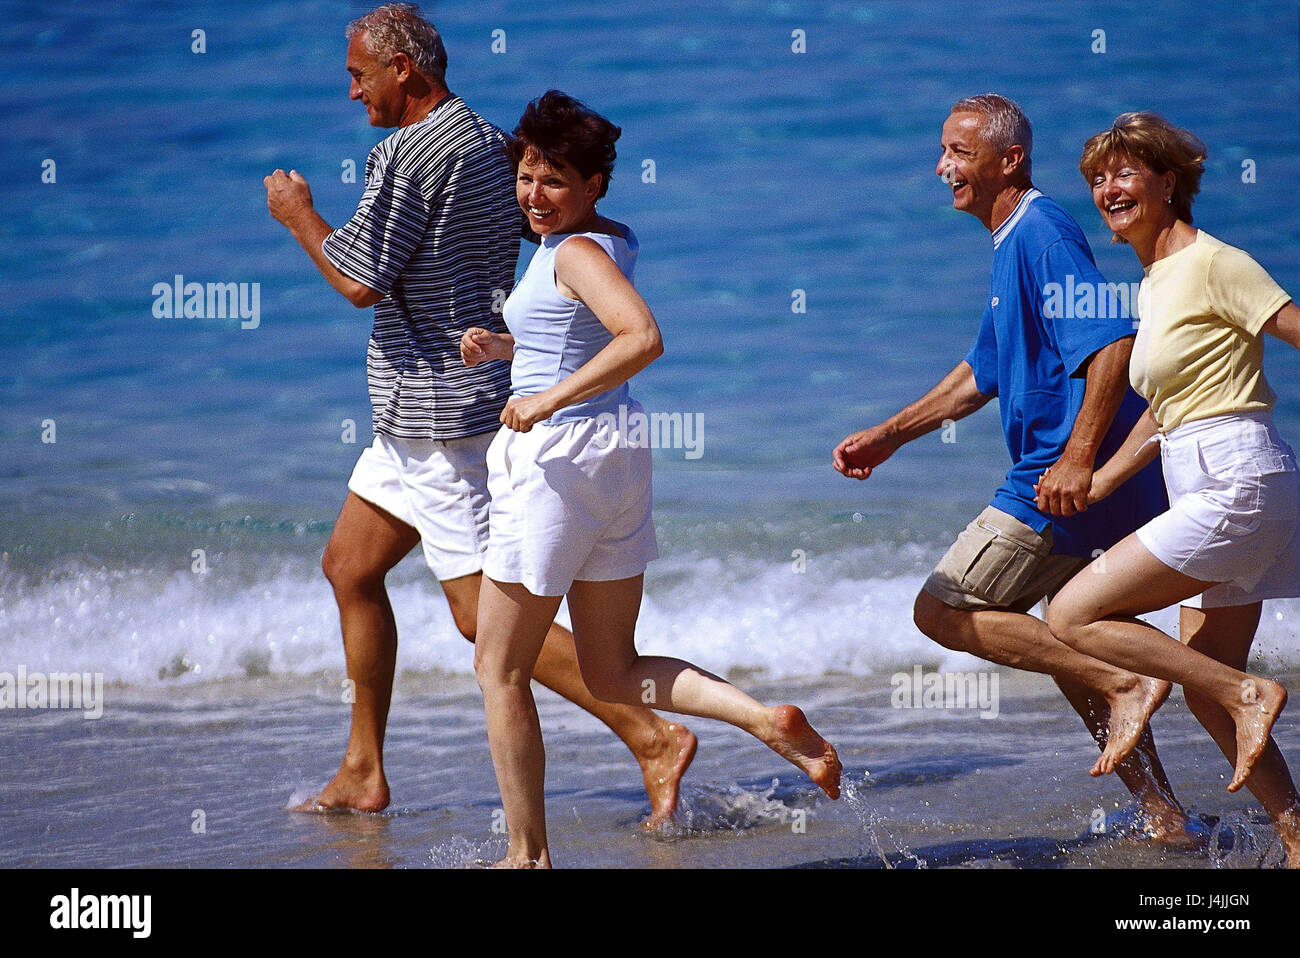 Couples, middle old person, beach run outside, summer, vacation, leisure time, lifestyle, four, friends, together, fun, happily, tuning, positively, sport, sportily, beach, sea, run, jog, jogging, fit fitness, agile, motion, activity, leisurewear Stock Photo